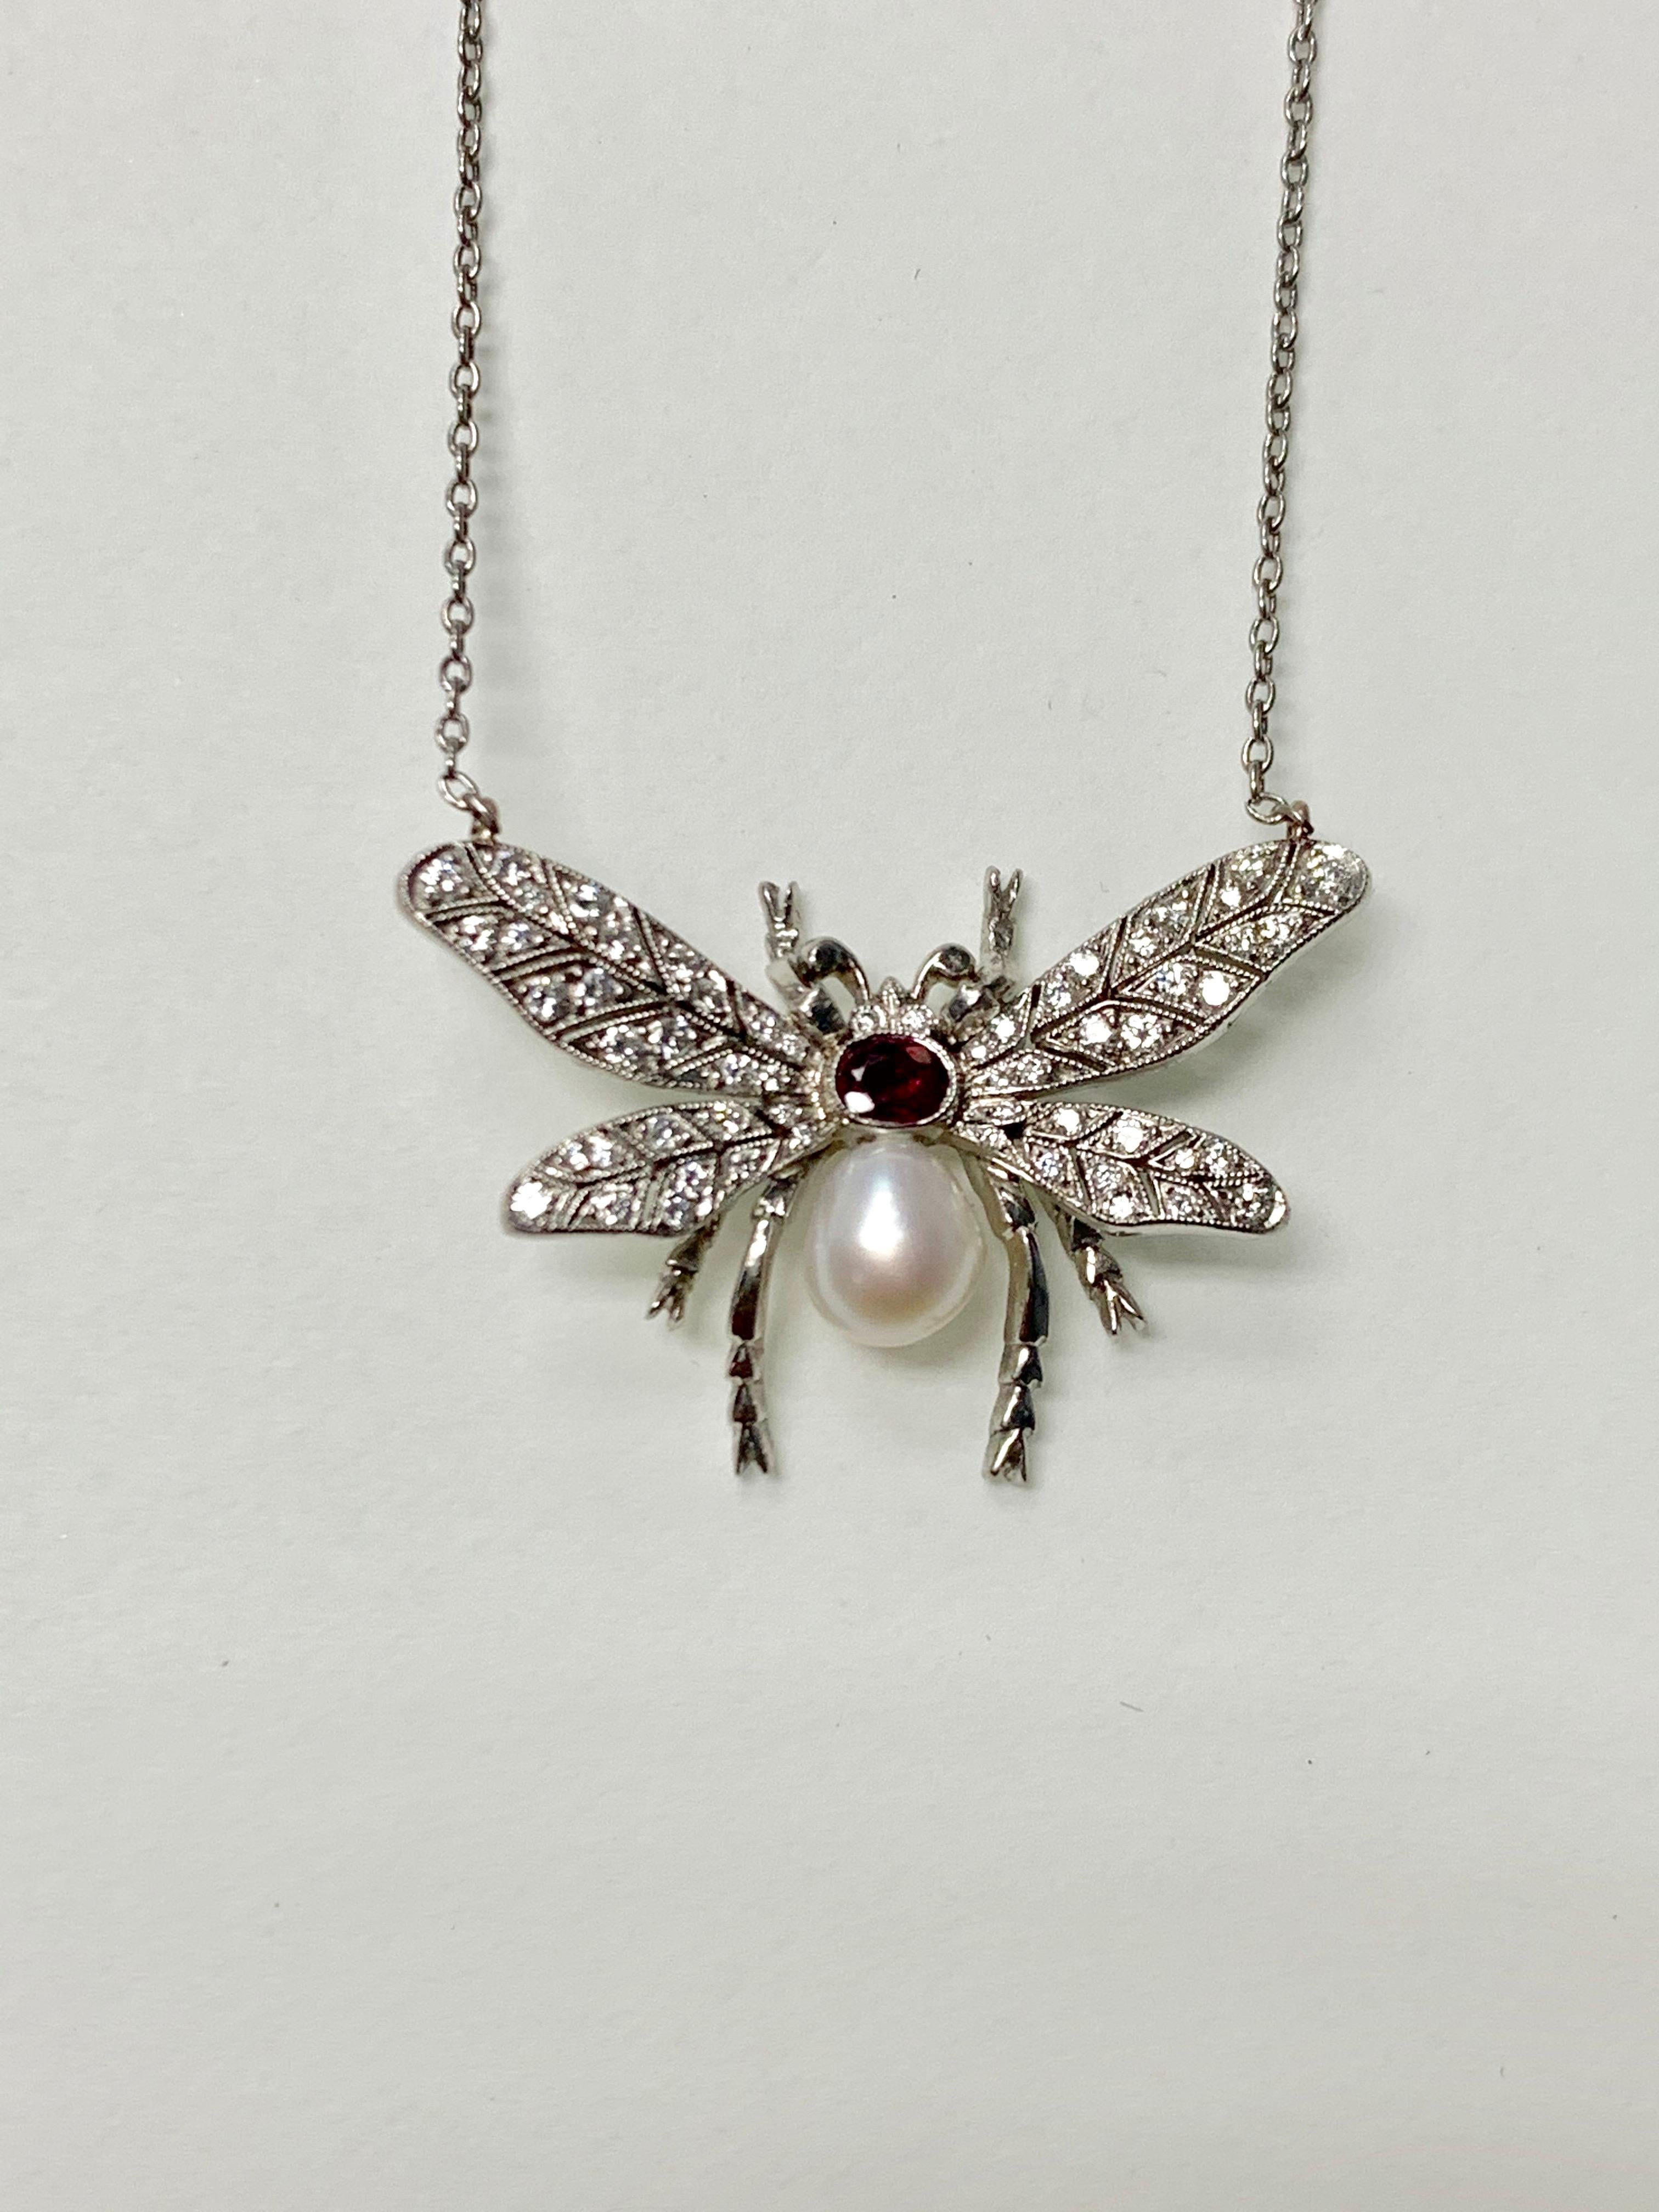 Diamond Pearl and Rubies Bumblebee Necklace in Platinum In Excellent Condition For Sale In New York, NY